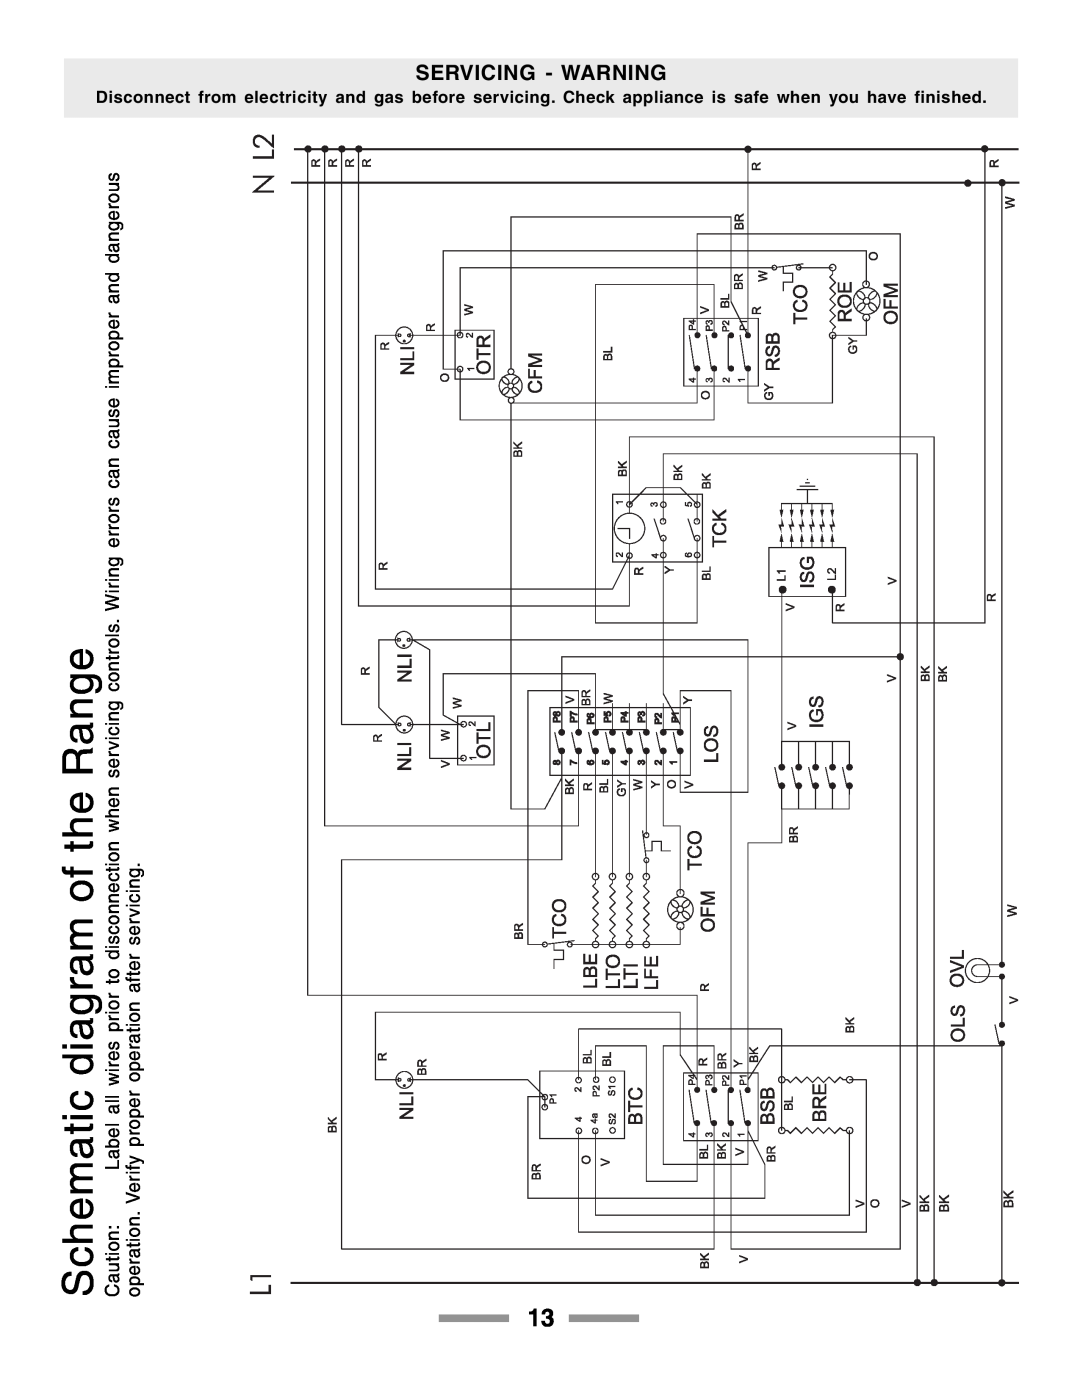 Aga Ranges F104650-01 diagram of the, Schematic, Servicing - Warning, wires prior to disconnection when, Caution Label all 